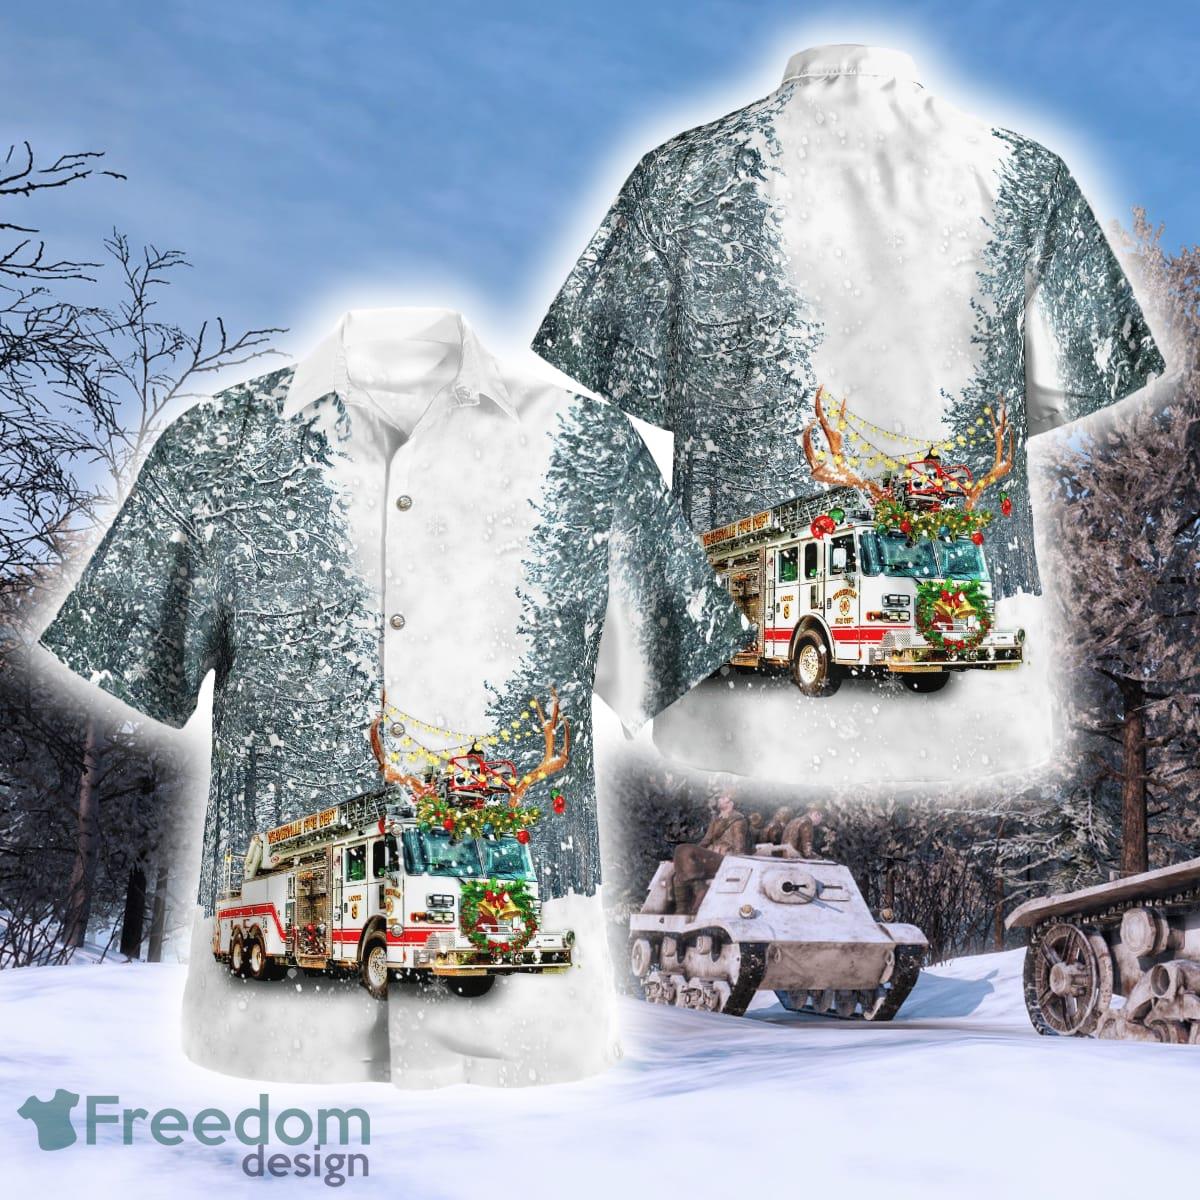 Personalized 3D T Shirt For Fire Man, Sublimation Firefighter Shirts